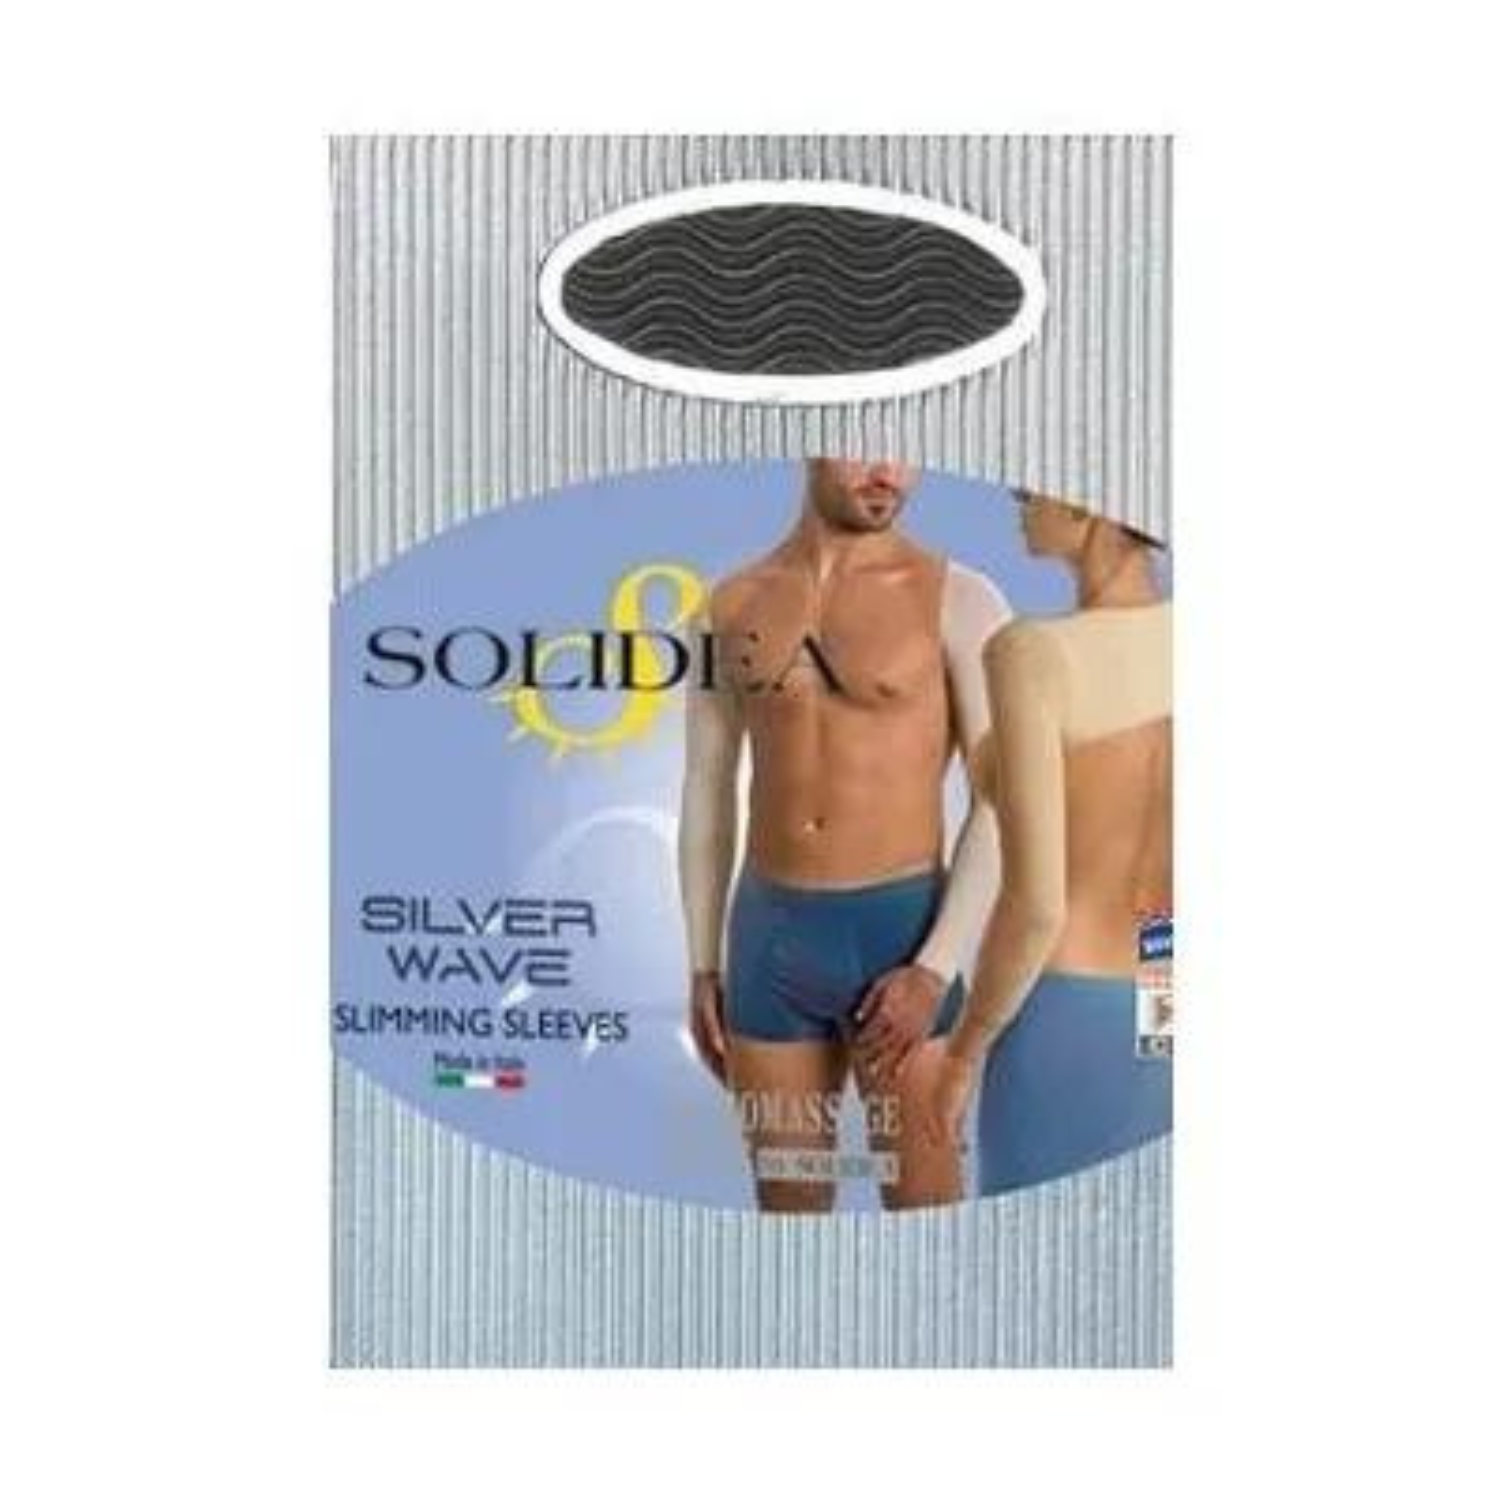 Solidea Silver Wave Slimming Sleeves Hihat 4XL Camel